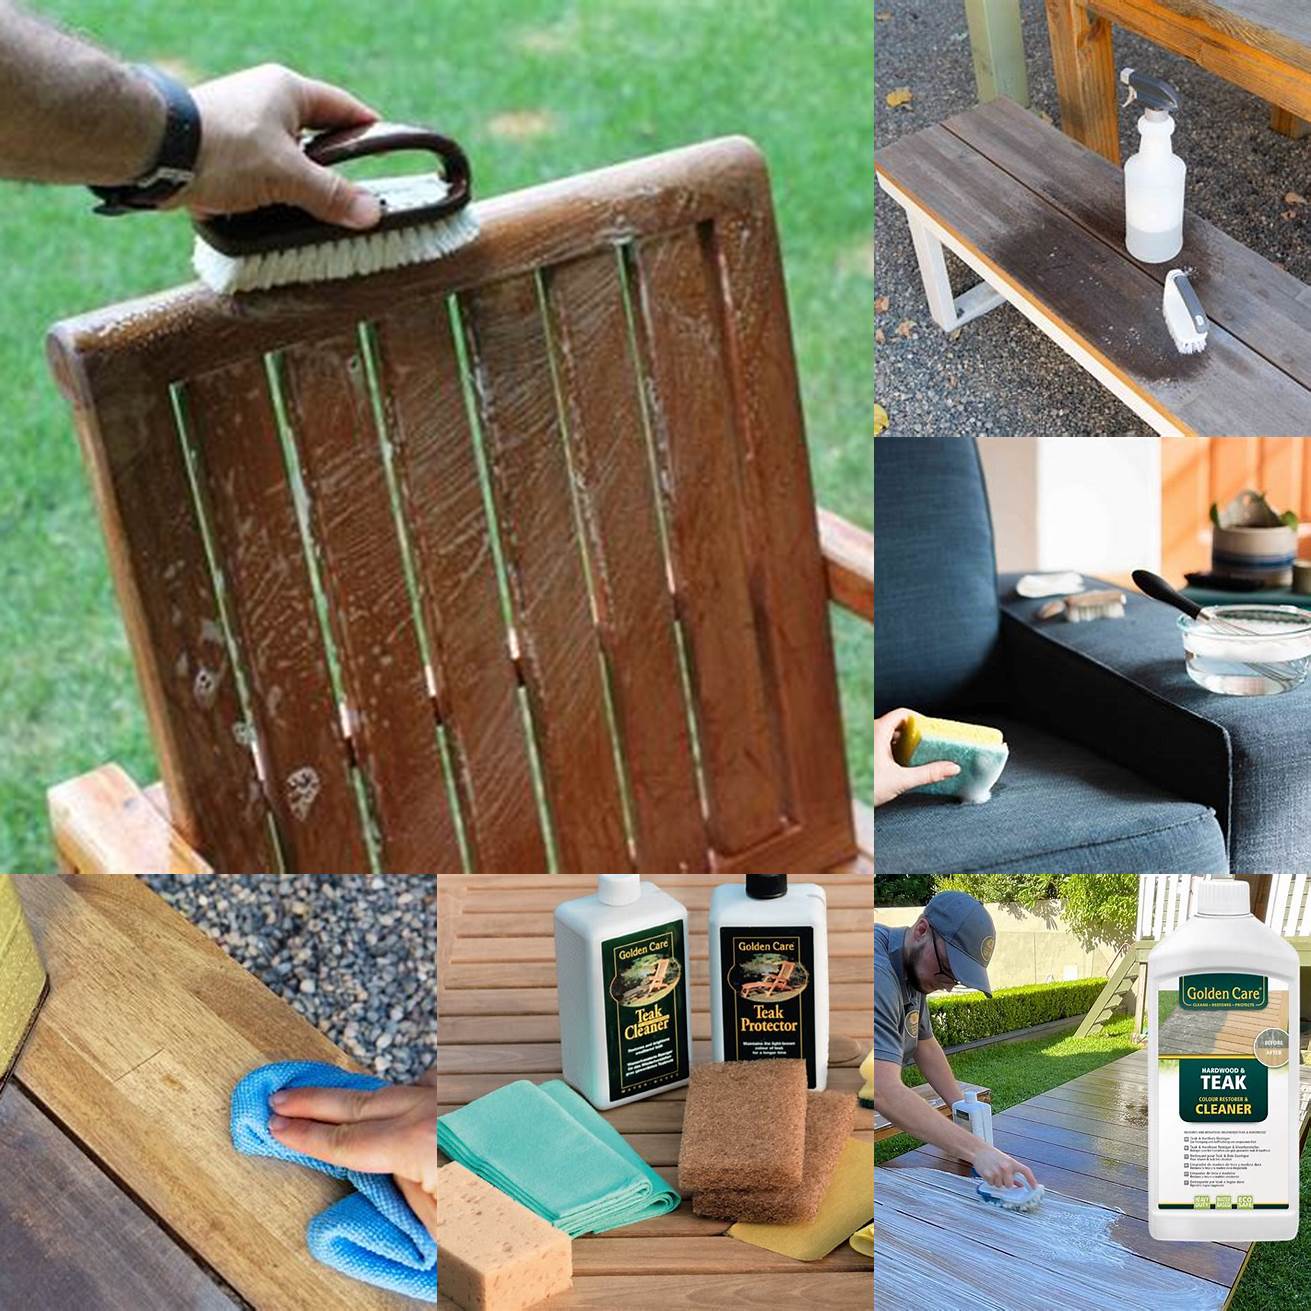 Always use a sponge or soft cloth when cleaning teak furniture